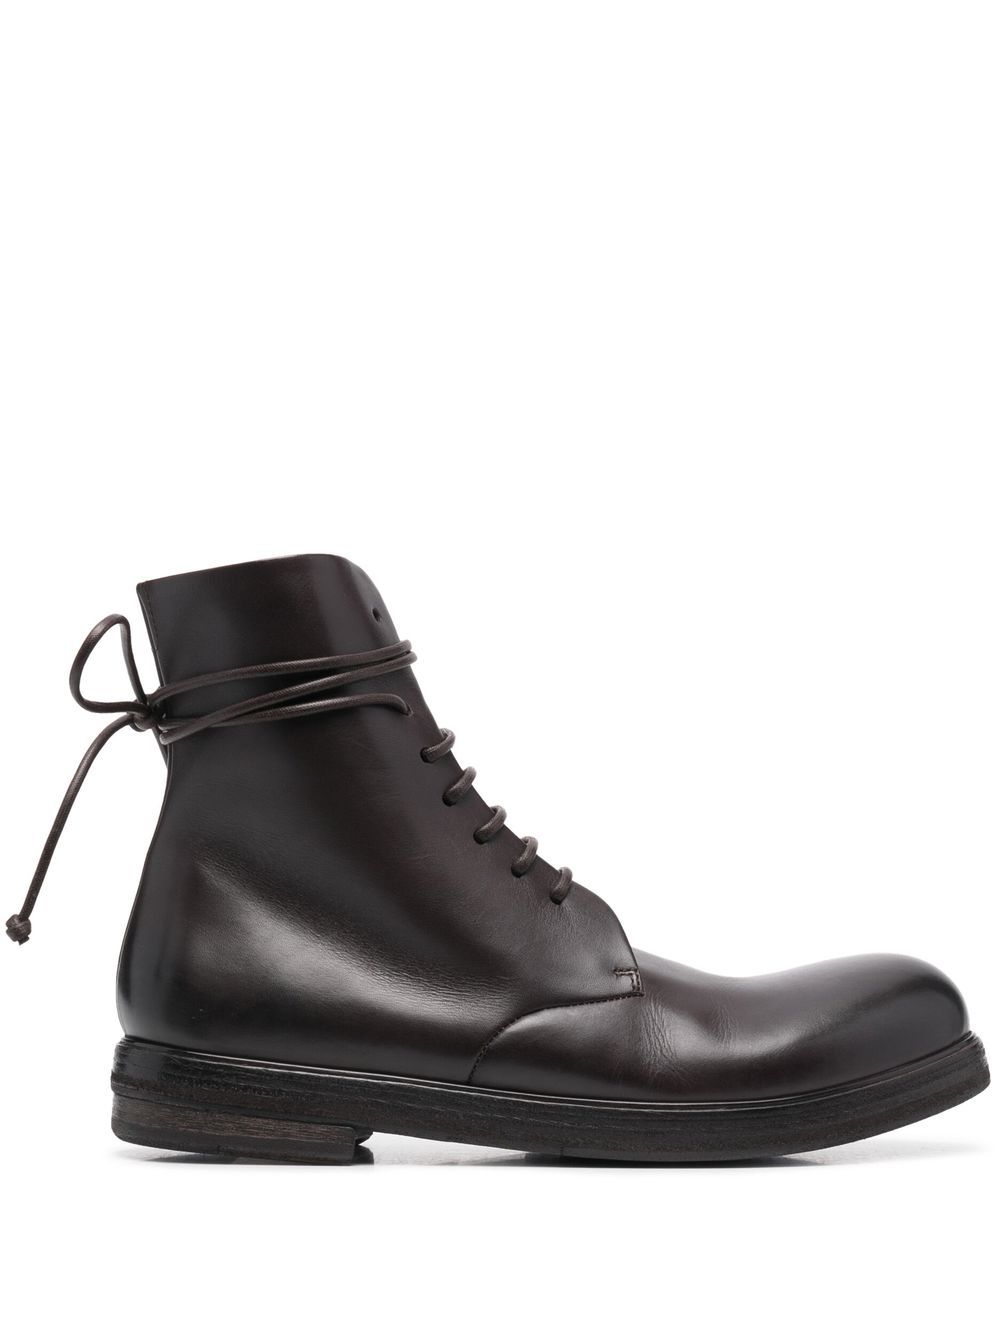 Marsèll lace-up leather boots - Brown von Marsèll